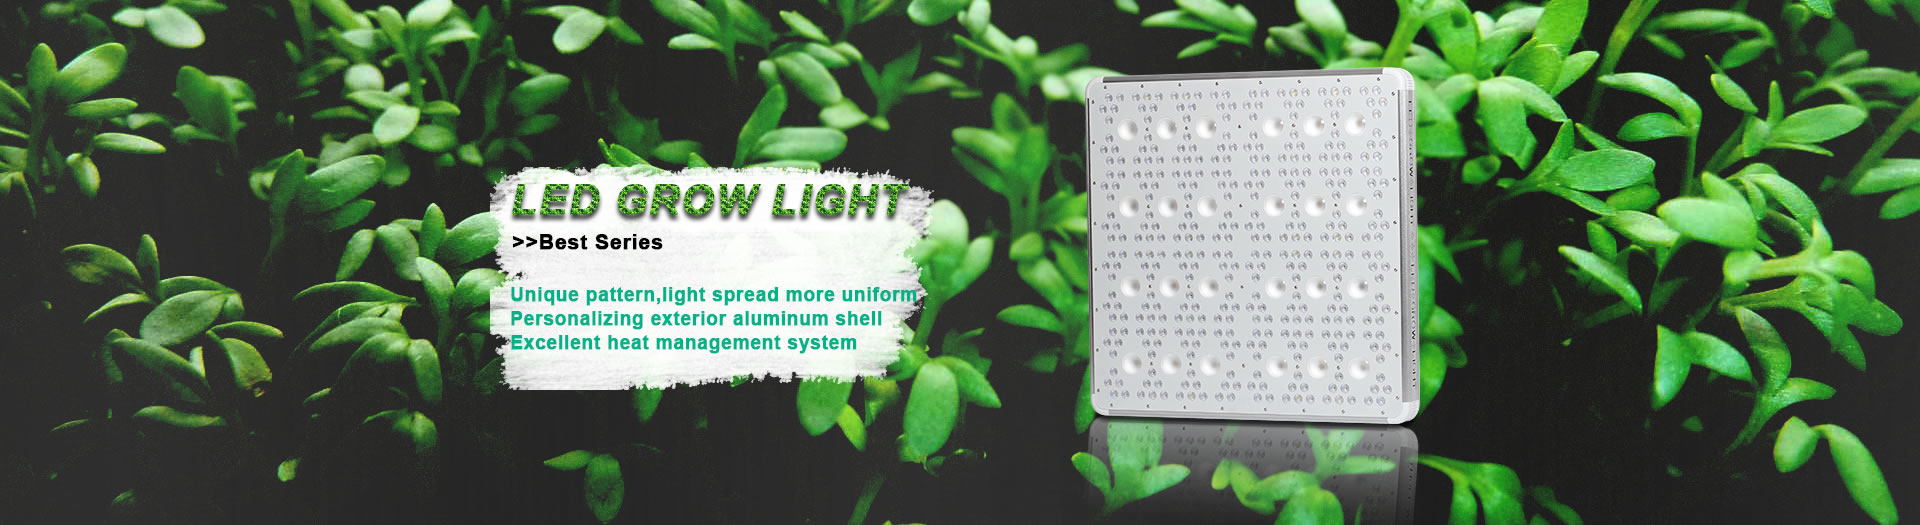 Rare deals on AeroGarden grow lamps keep all of your plants happy from $28 (Reg. up to $120)